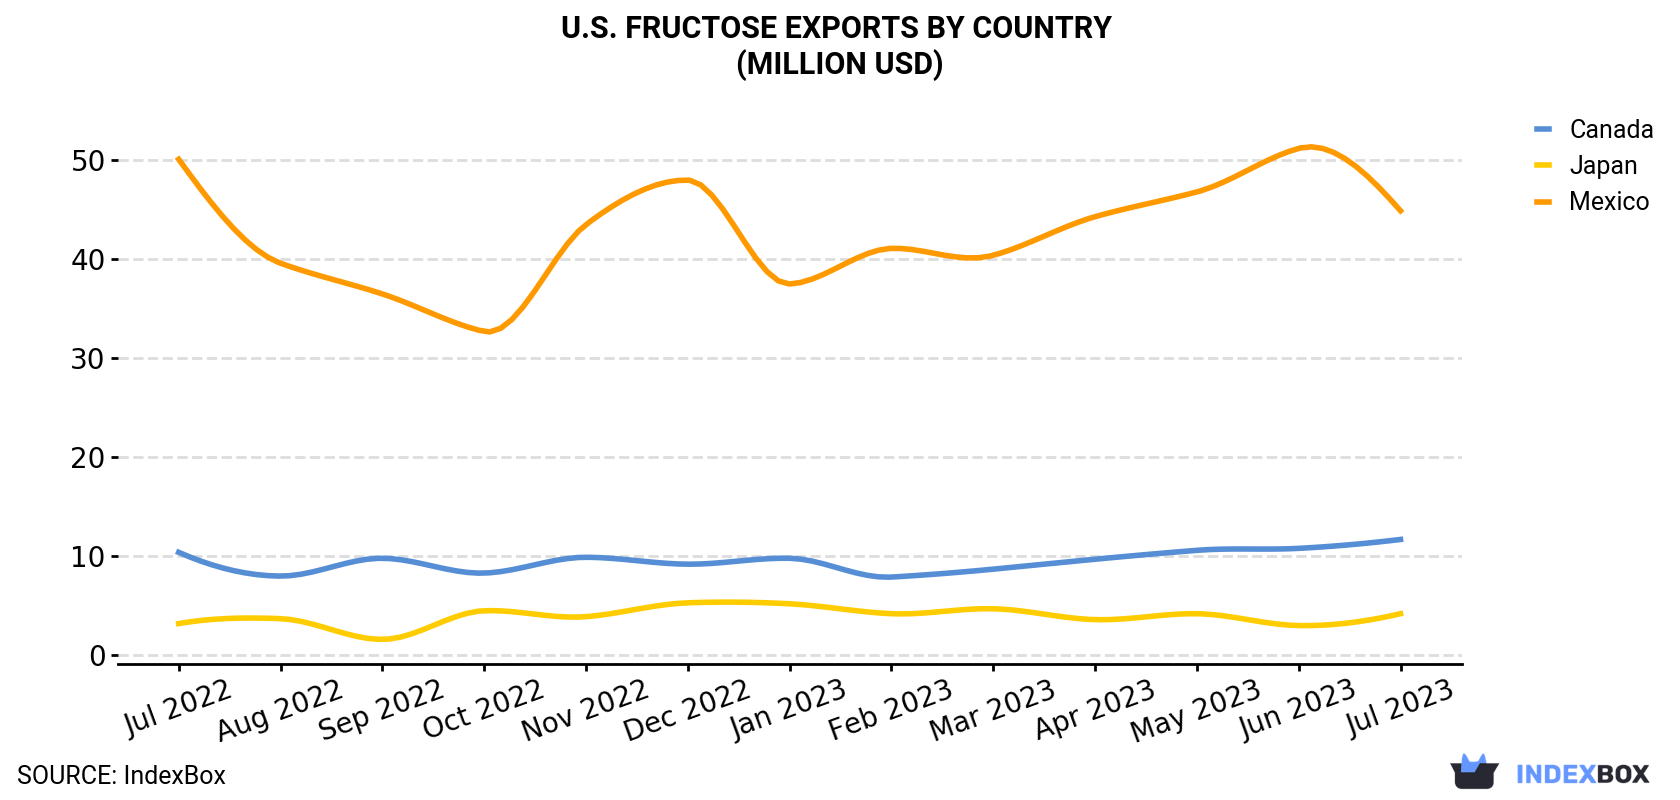 U.S. Fructose Exports By Country (Million USD)